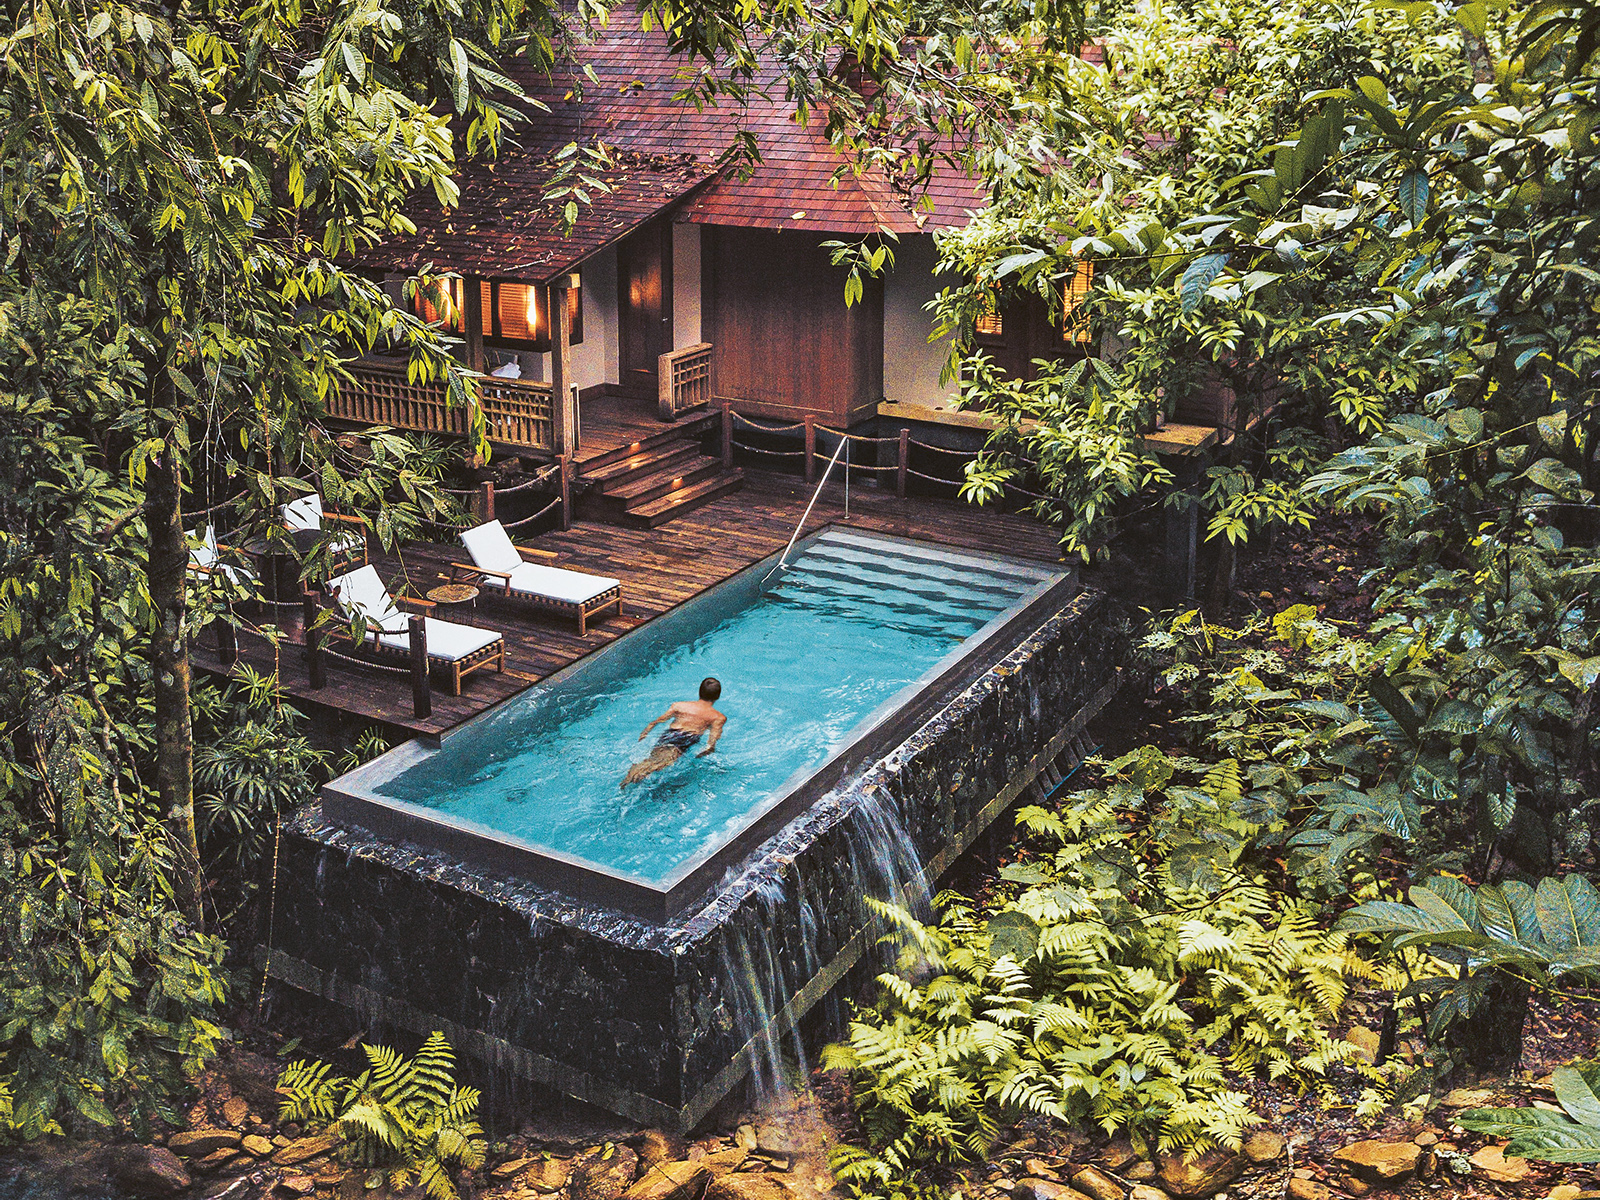 A villa with sun loungers and pool set in the lush green rainforest